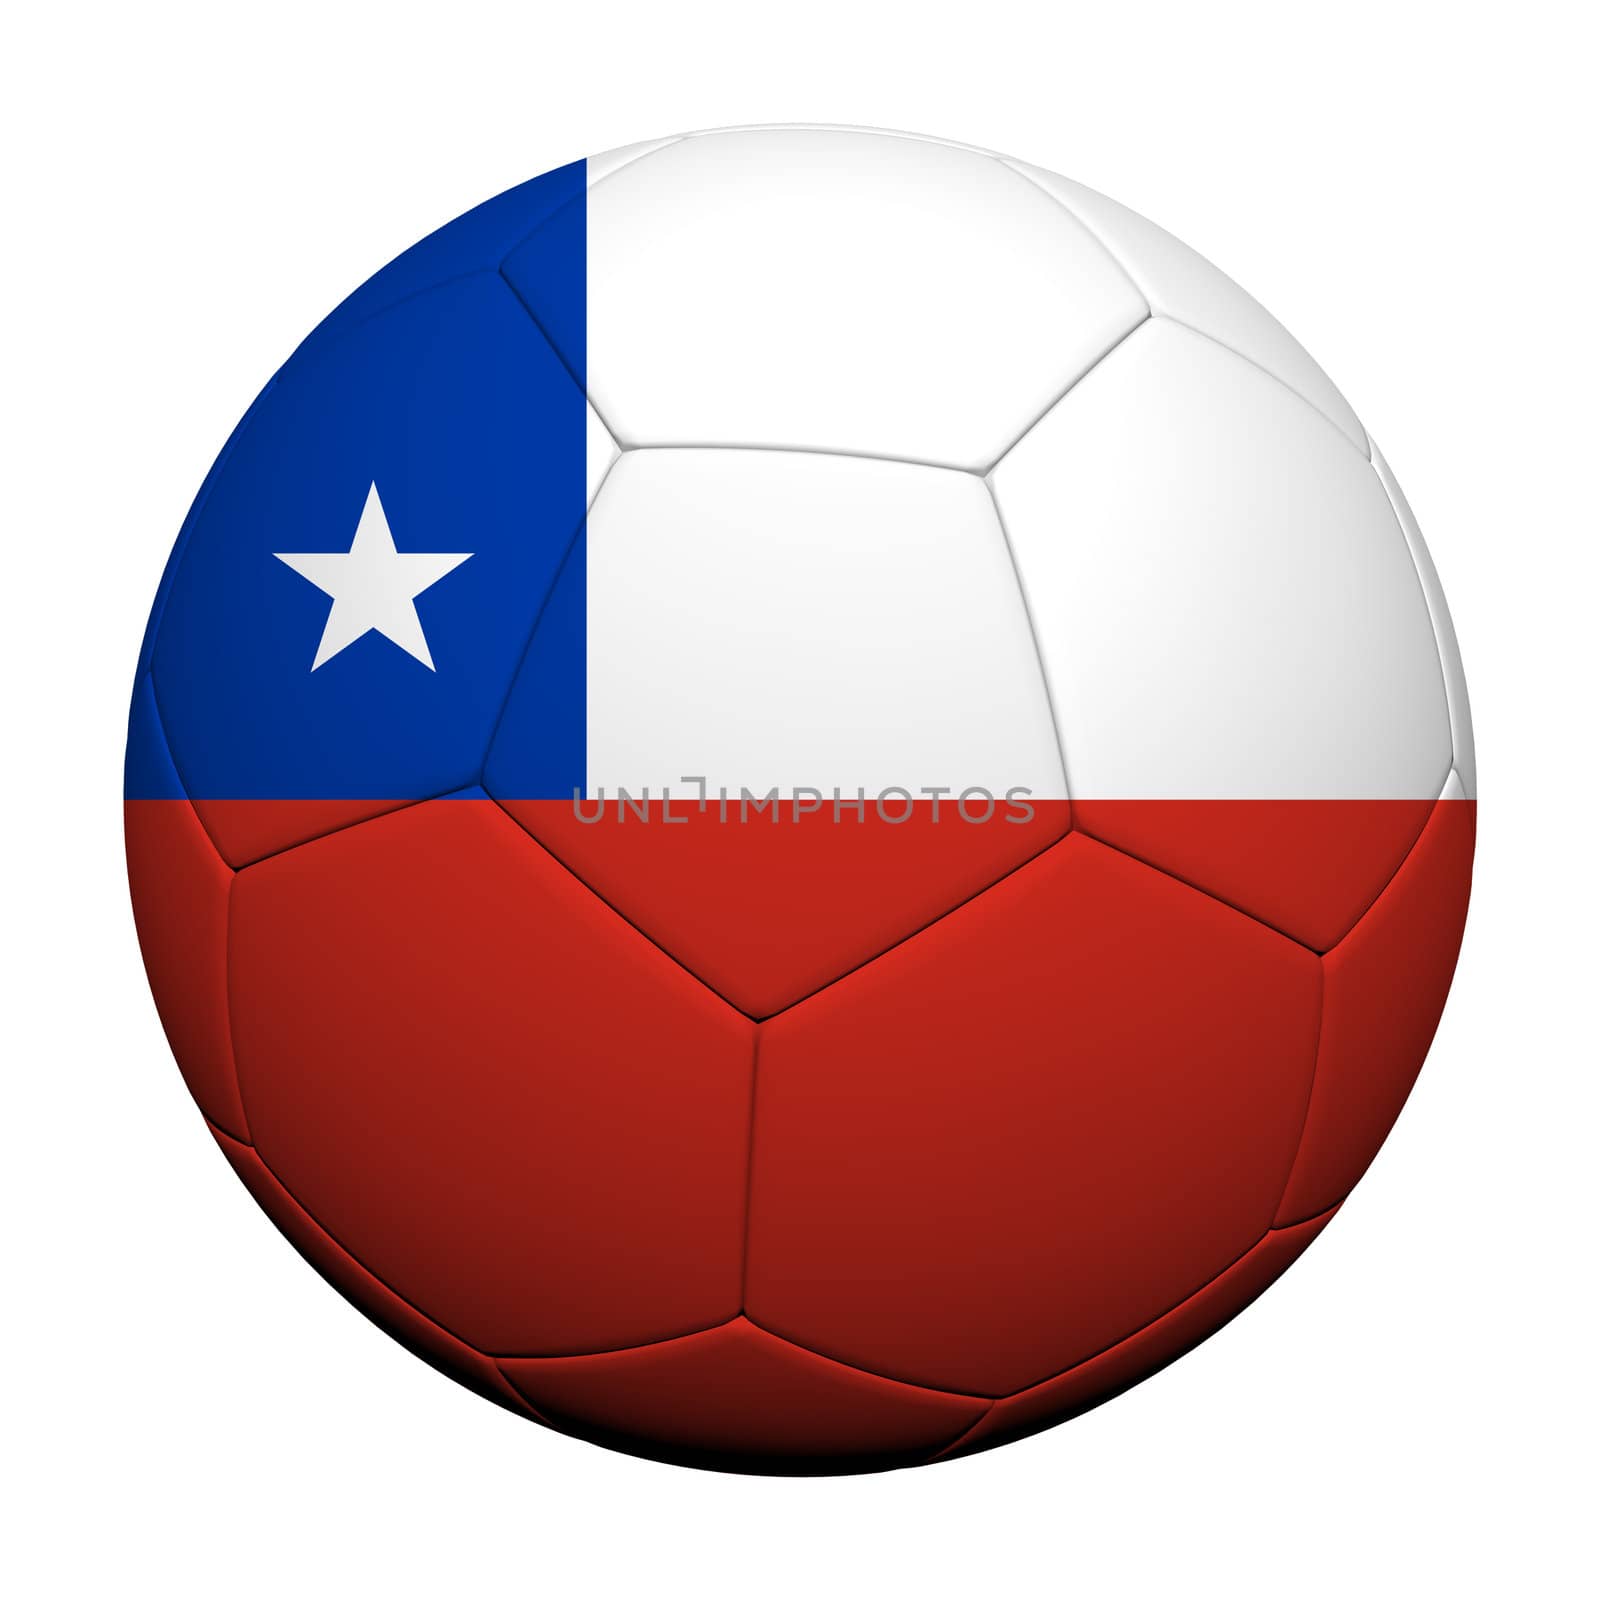 Chile  Flag Pattern 3d rendering of a soccer ball  by jakgree